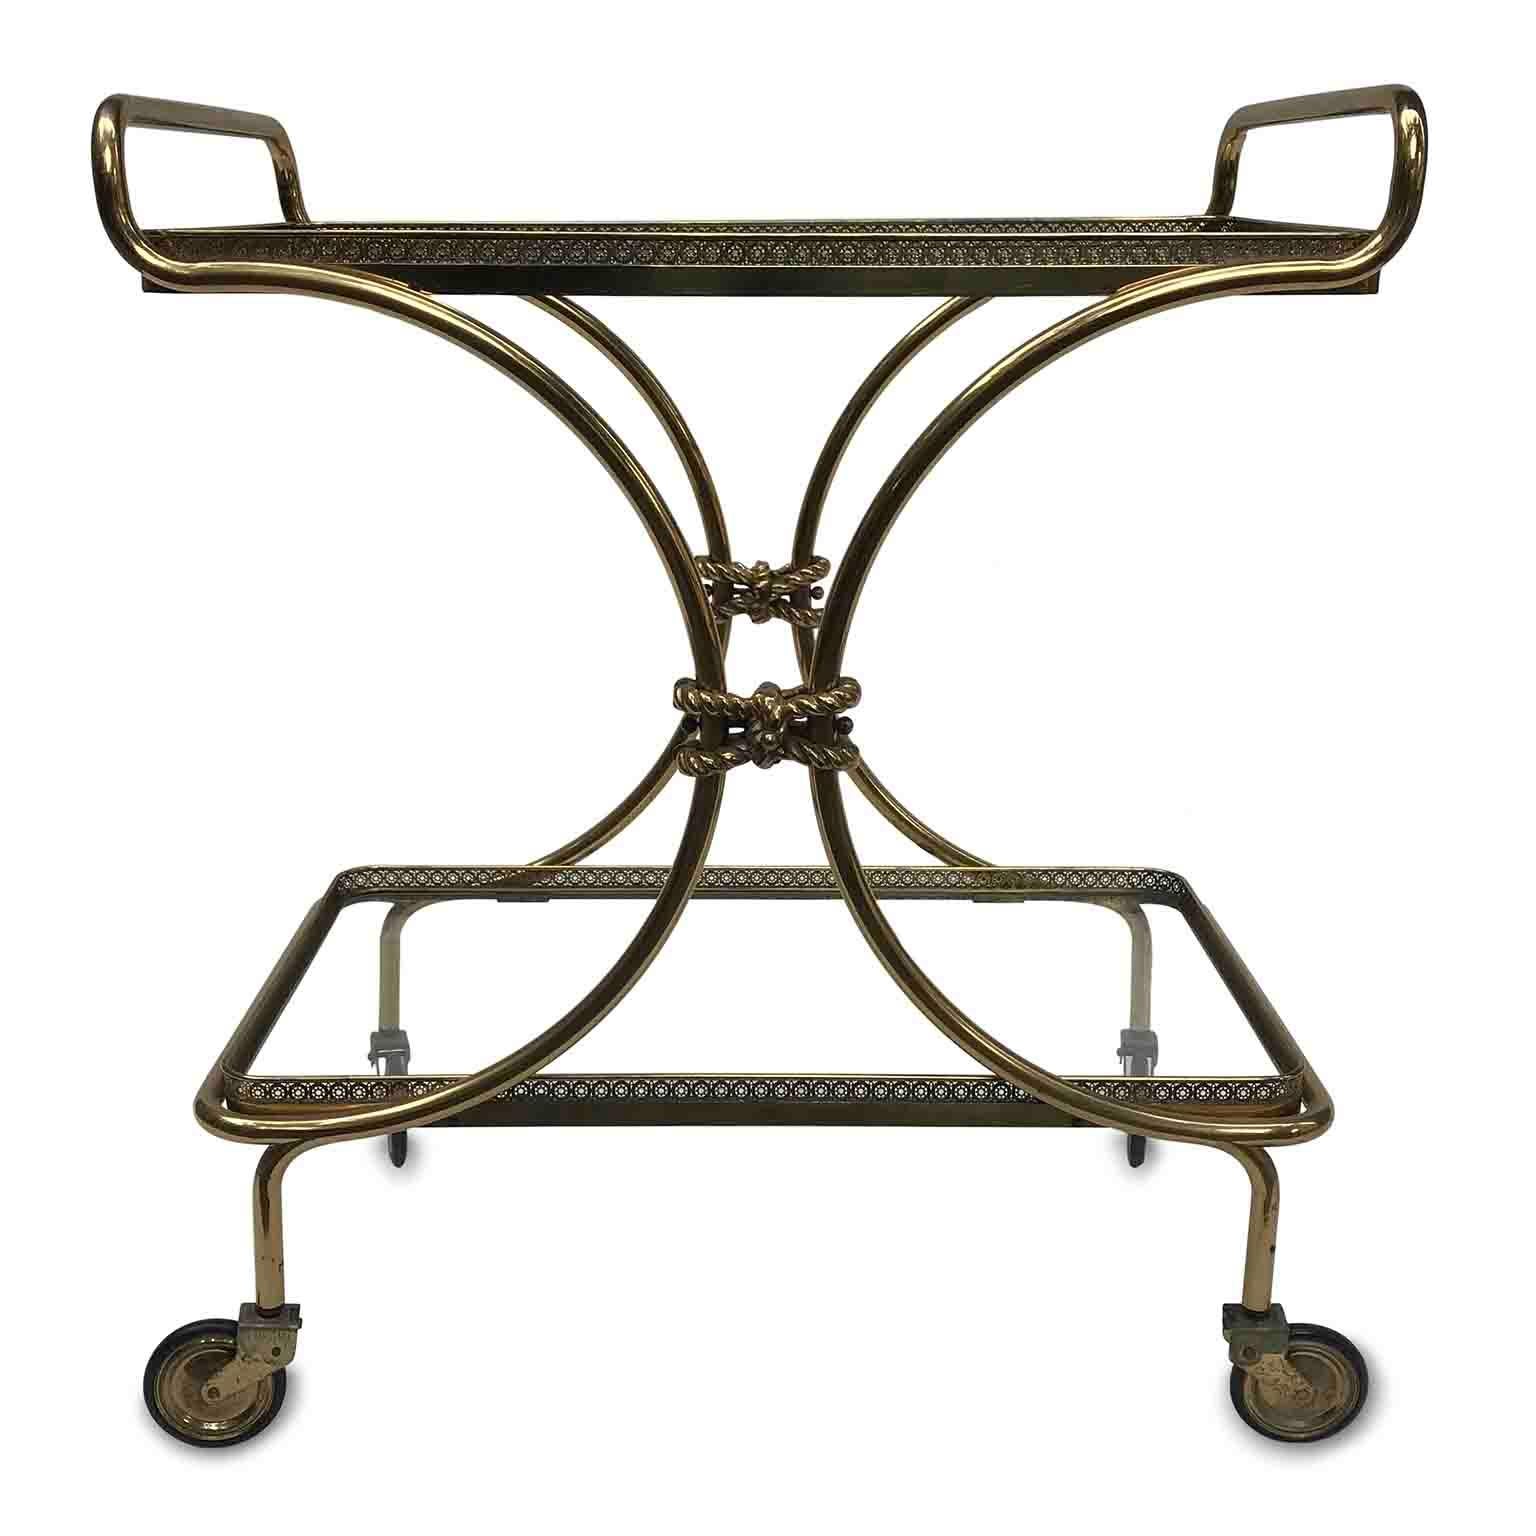 Mid-20th century Italian two-tiered brass bar cart in good condition with two crystal shelves surrounded by lovely pierced brass banisters. 
The side crossed tubes of the rectangular frame structure are joined by two cast brass elements in the shape